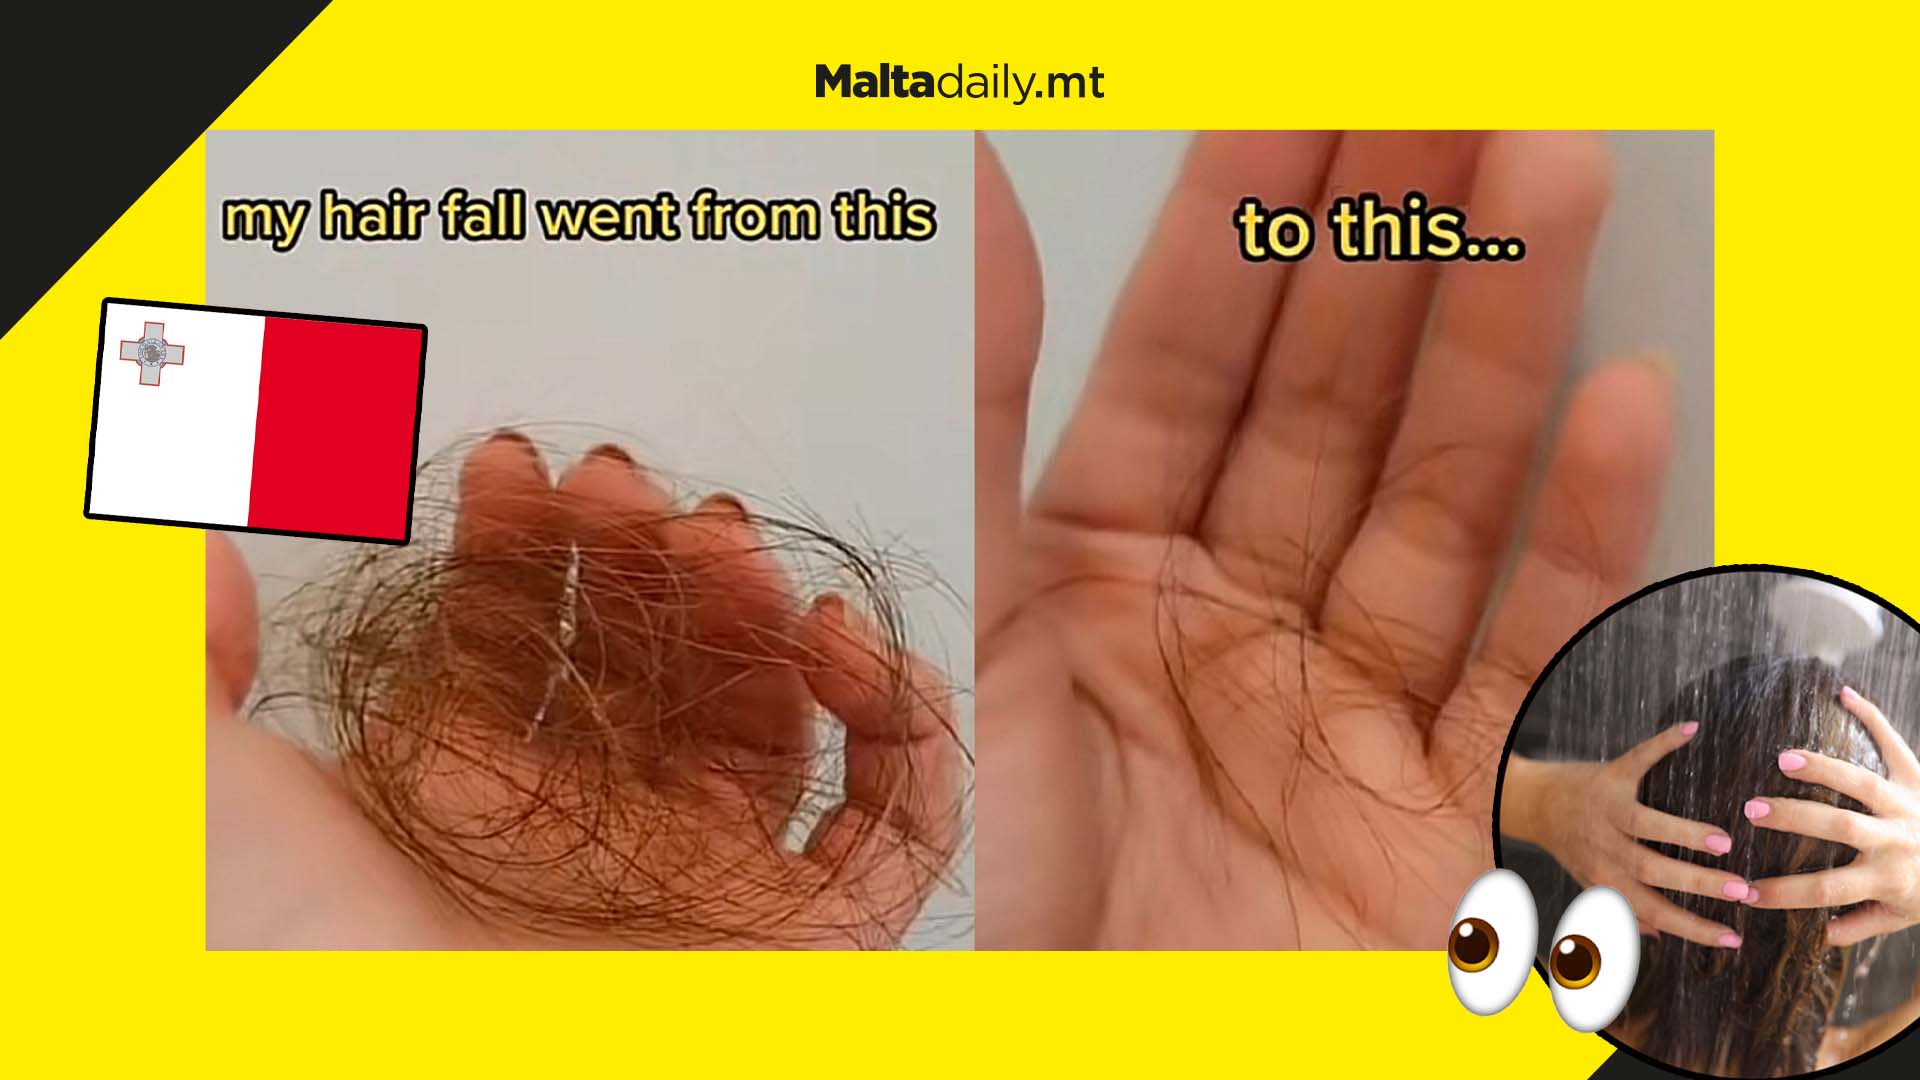 Foreign woman in Malta finds hair loss hack after shower causes issue